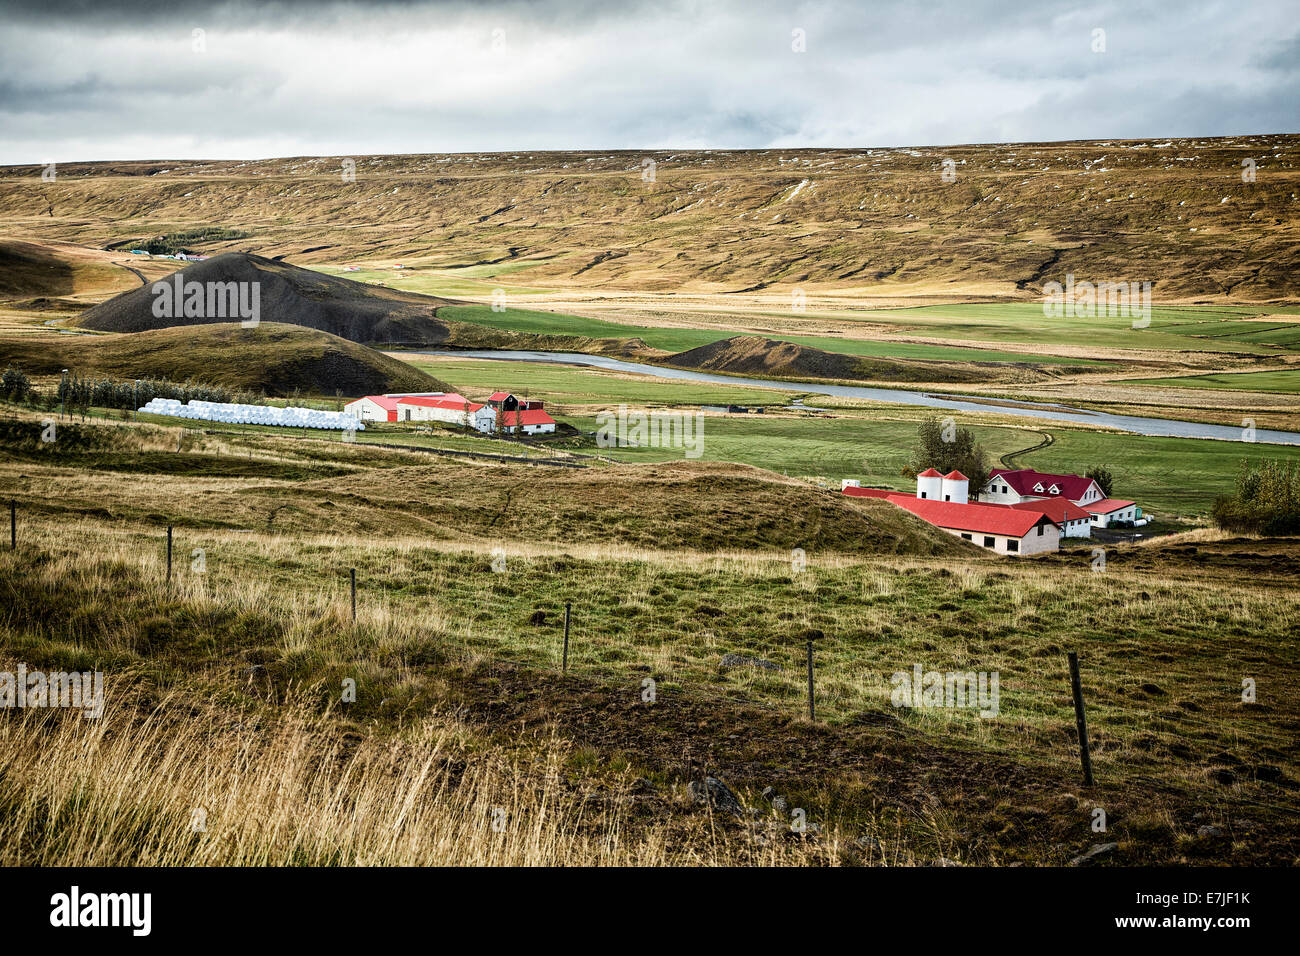 Farm, Bed and Breakfast, Herd, group, court, yard, Iceland, Europe, Vatndalsdalur, Vatnsdalur, scenery, landscape, Stock Photo